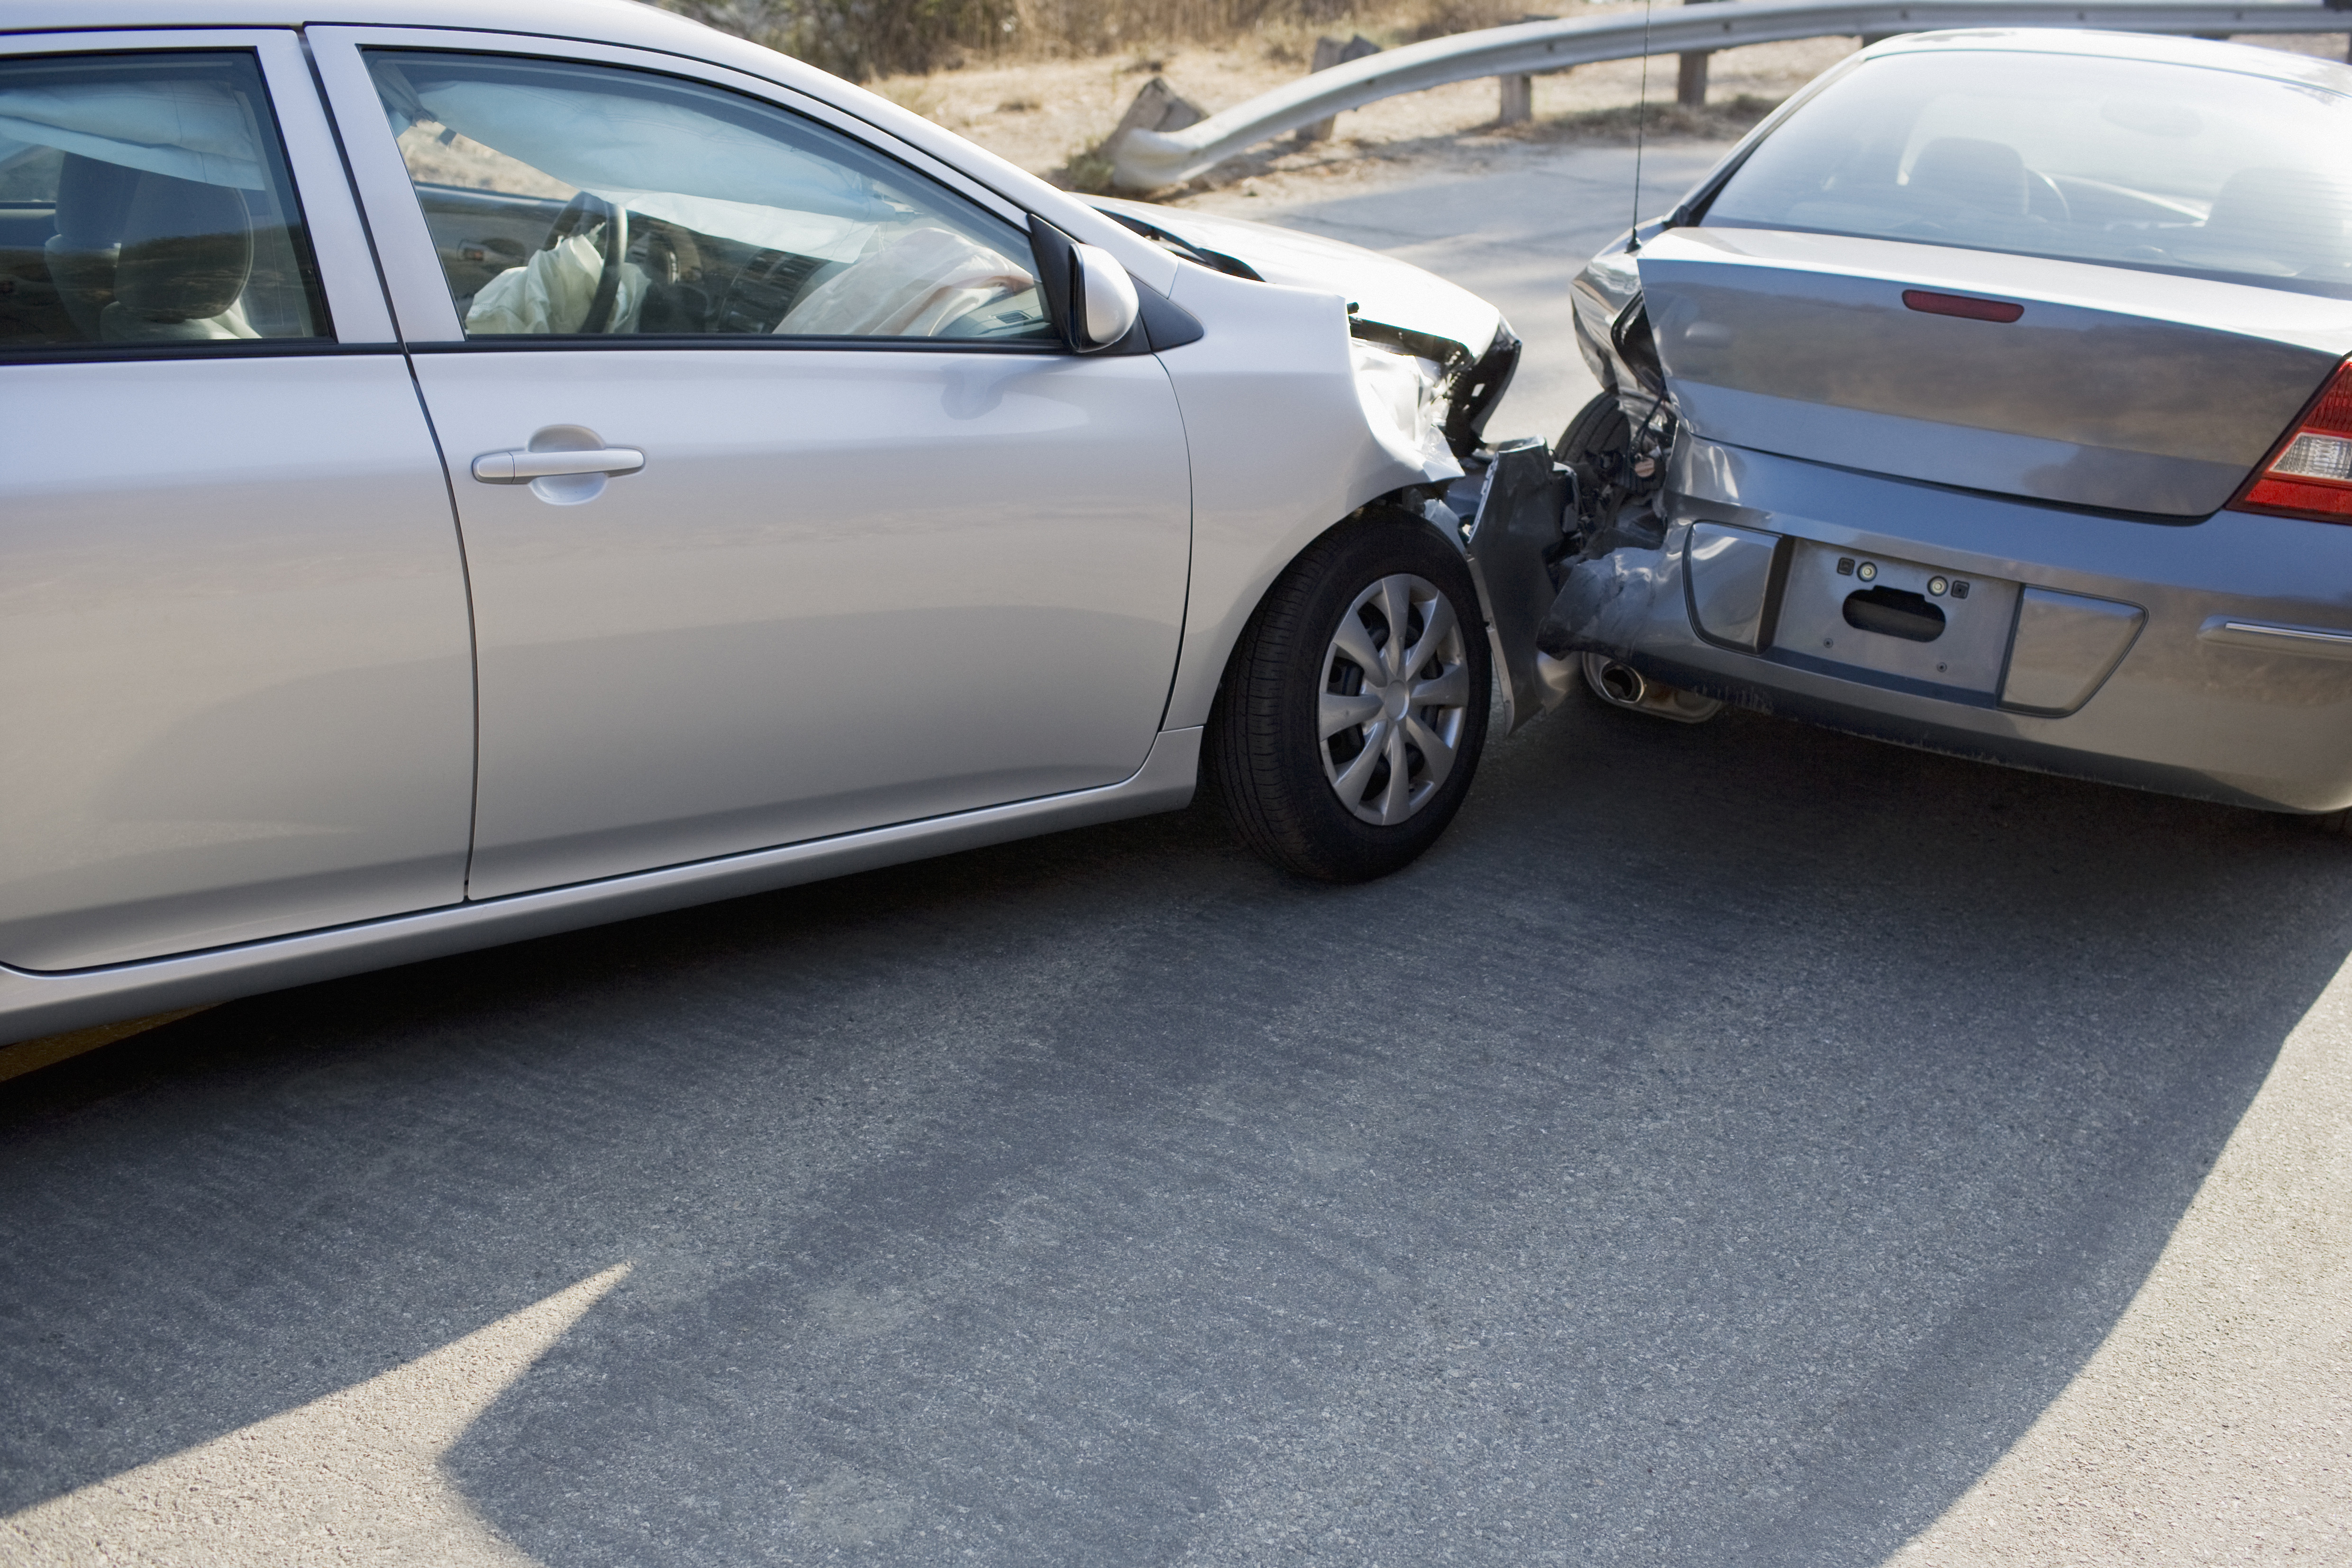 Two cars in collision on a roadway. (Getty Images)